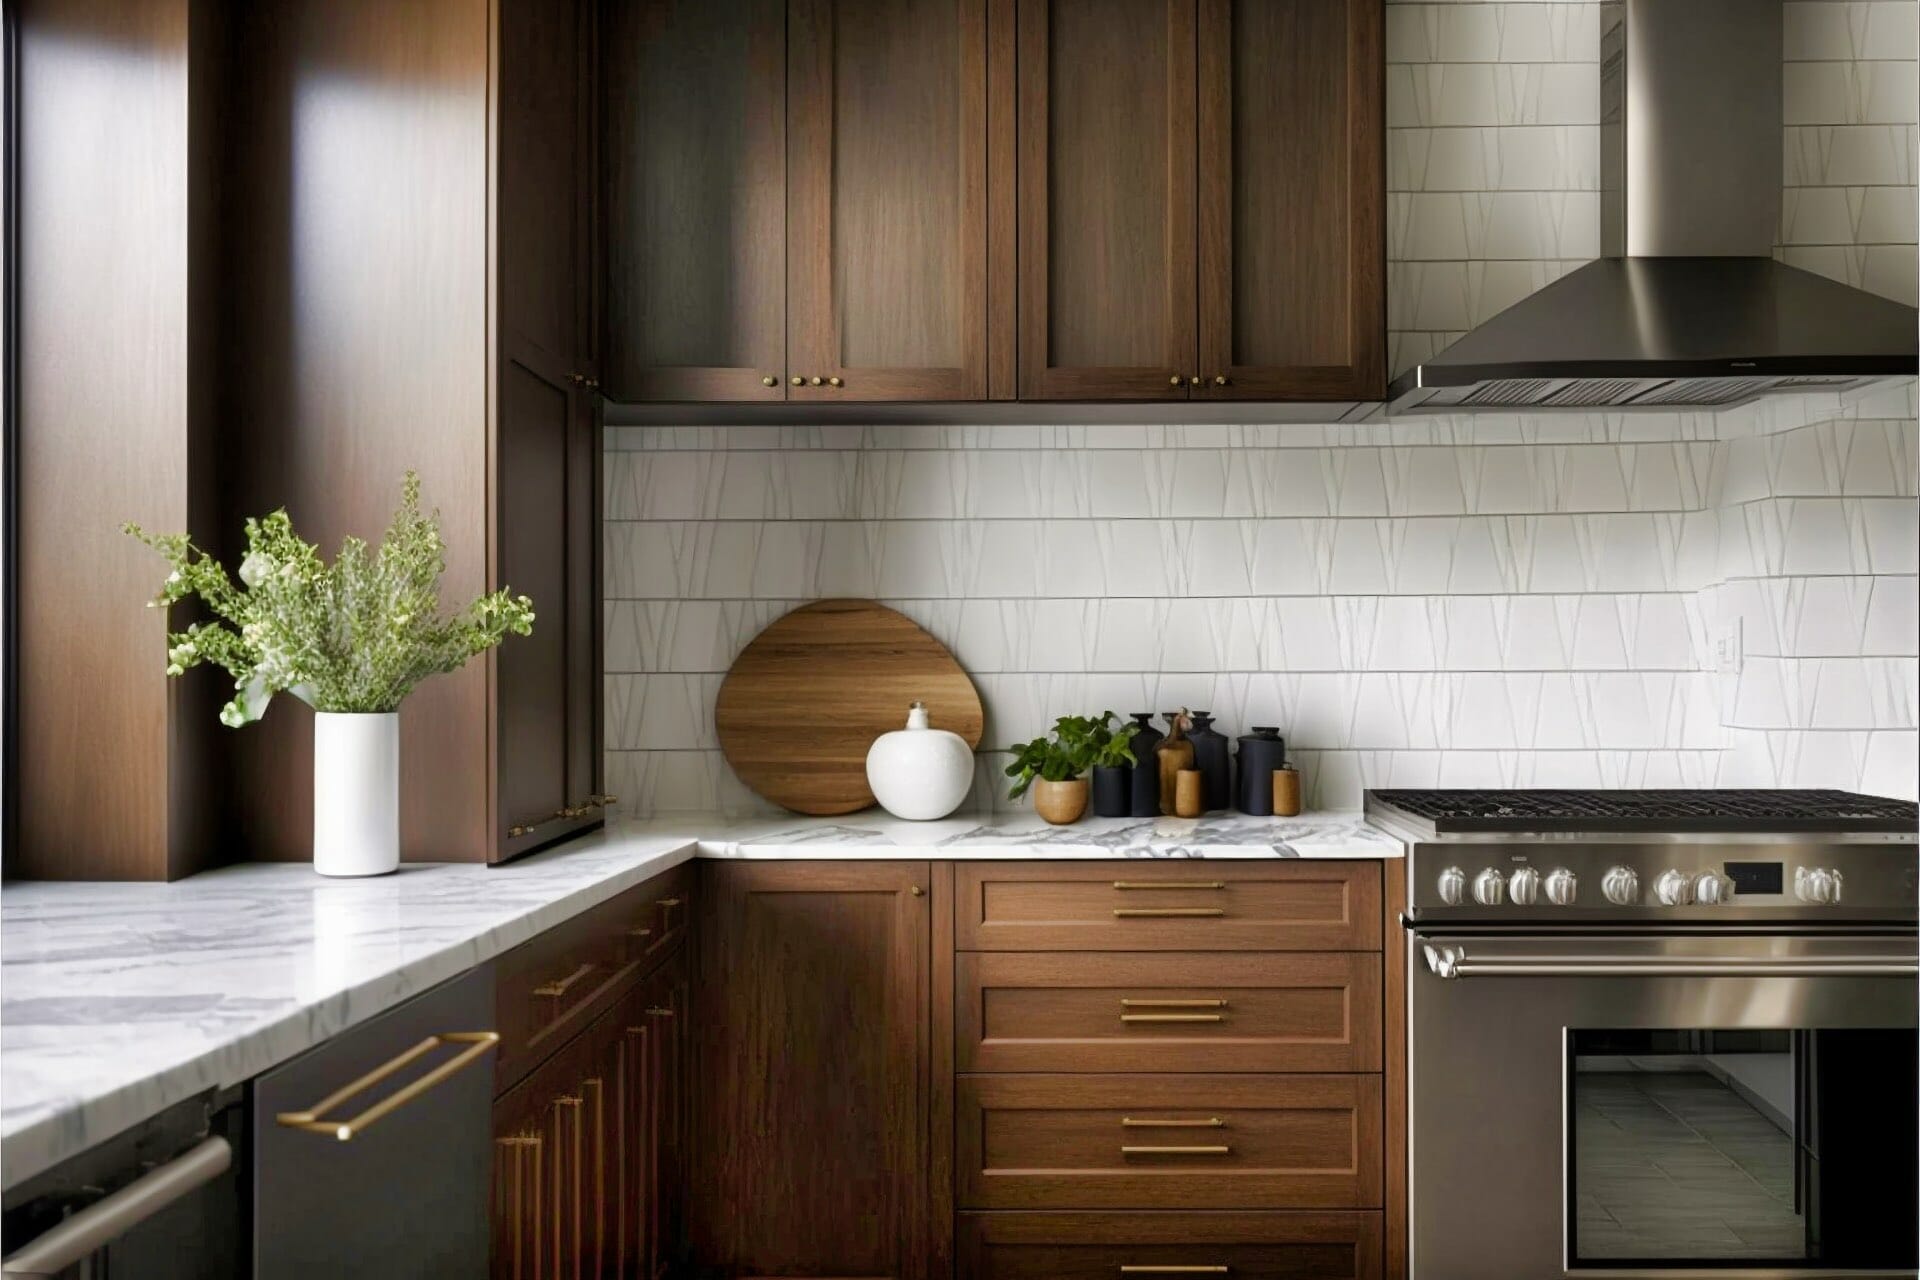 A Minimalistic Kitchen Featuring Dark Oak Cabinetry, White Tile Backsplash, And A Marble Countertop.